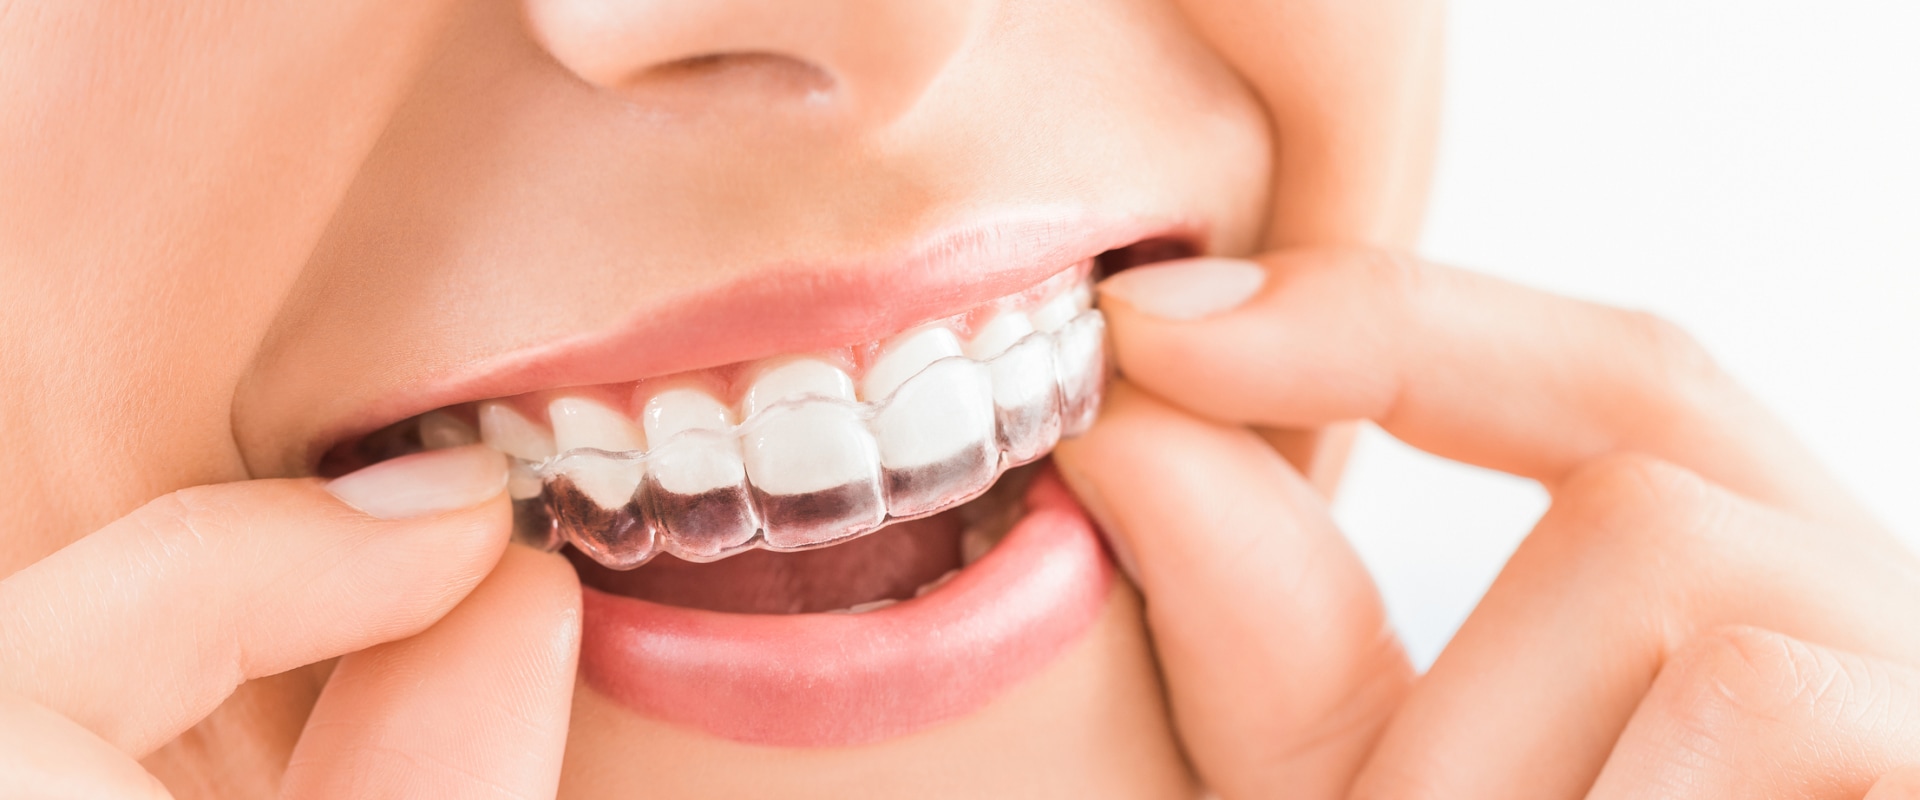 Where to Get Invisalign: Find an Expert Near You